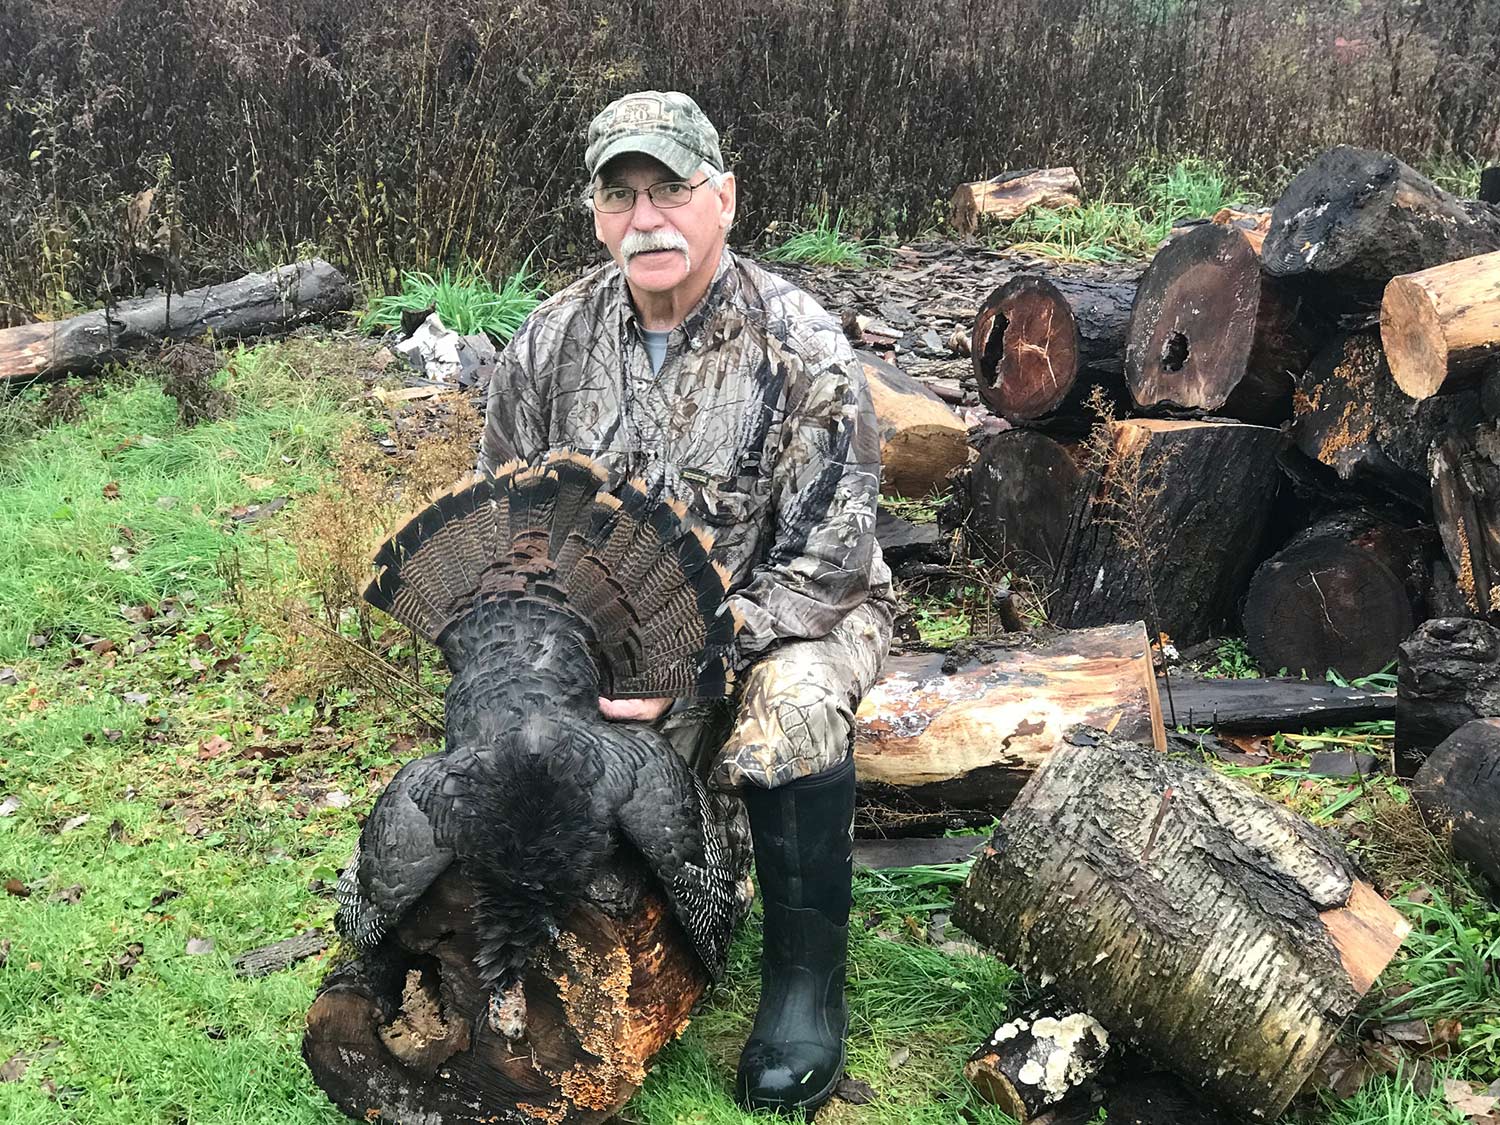 A hunter poses behind a turkey and fans out its tailfeathers.